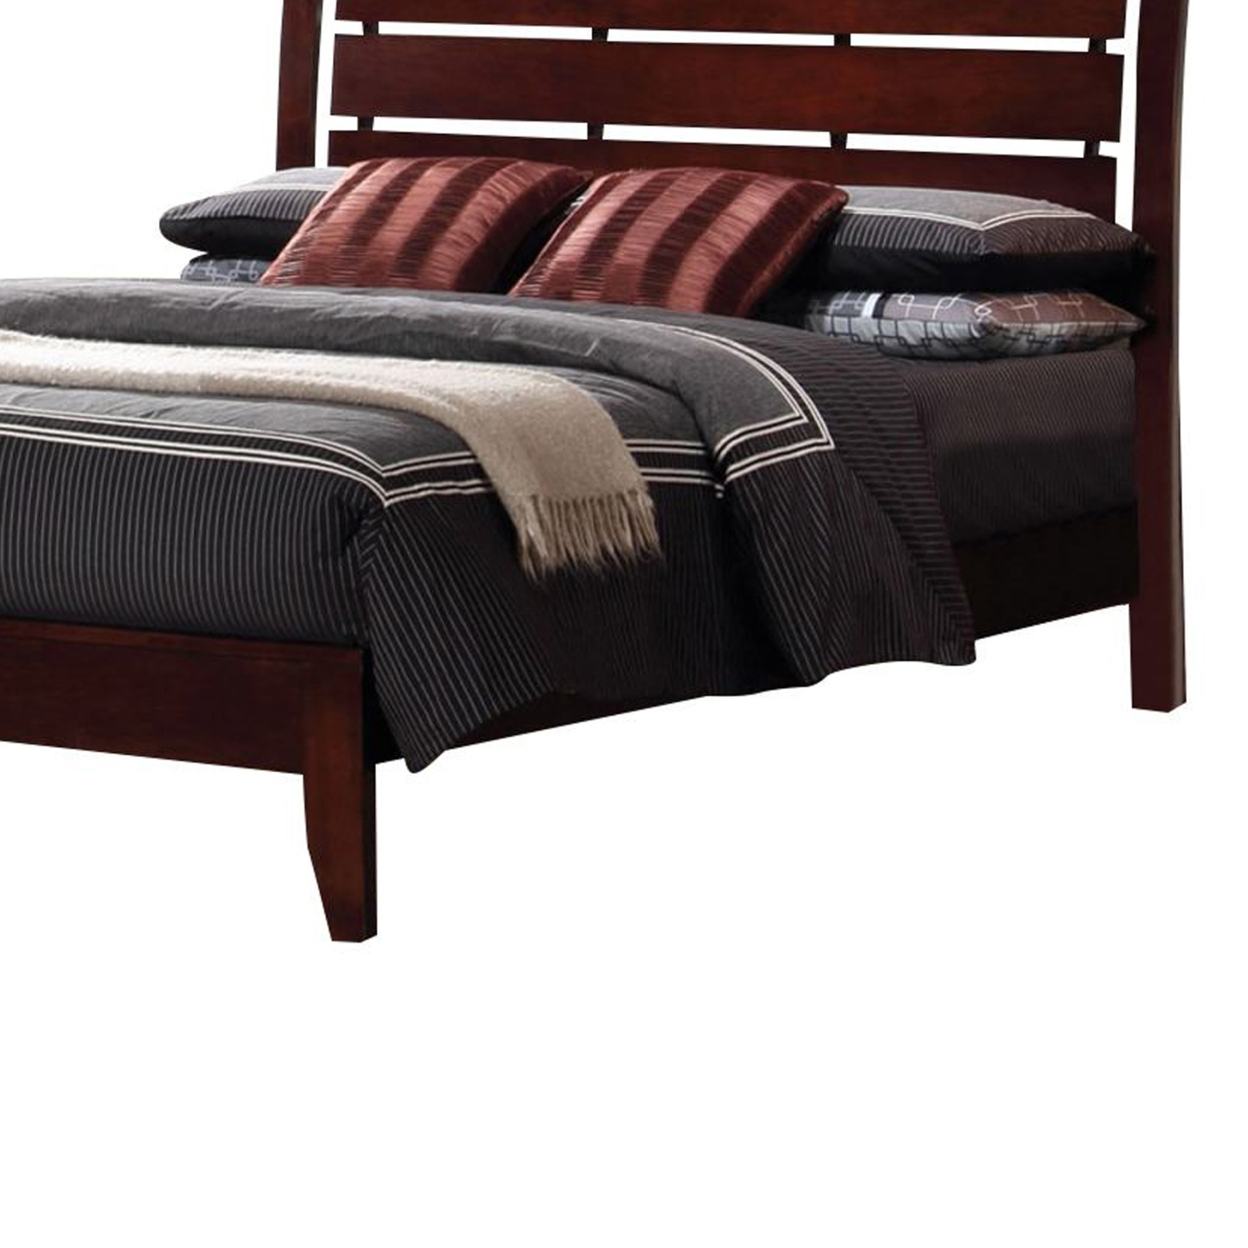 Transitional California King Size Wooden Bed With Slatted Headboard, Brown- Saltoro Sherpi